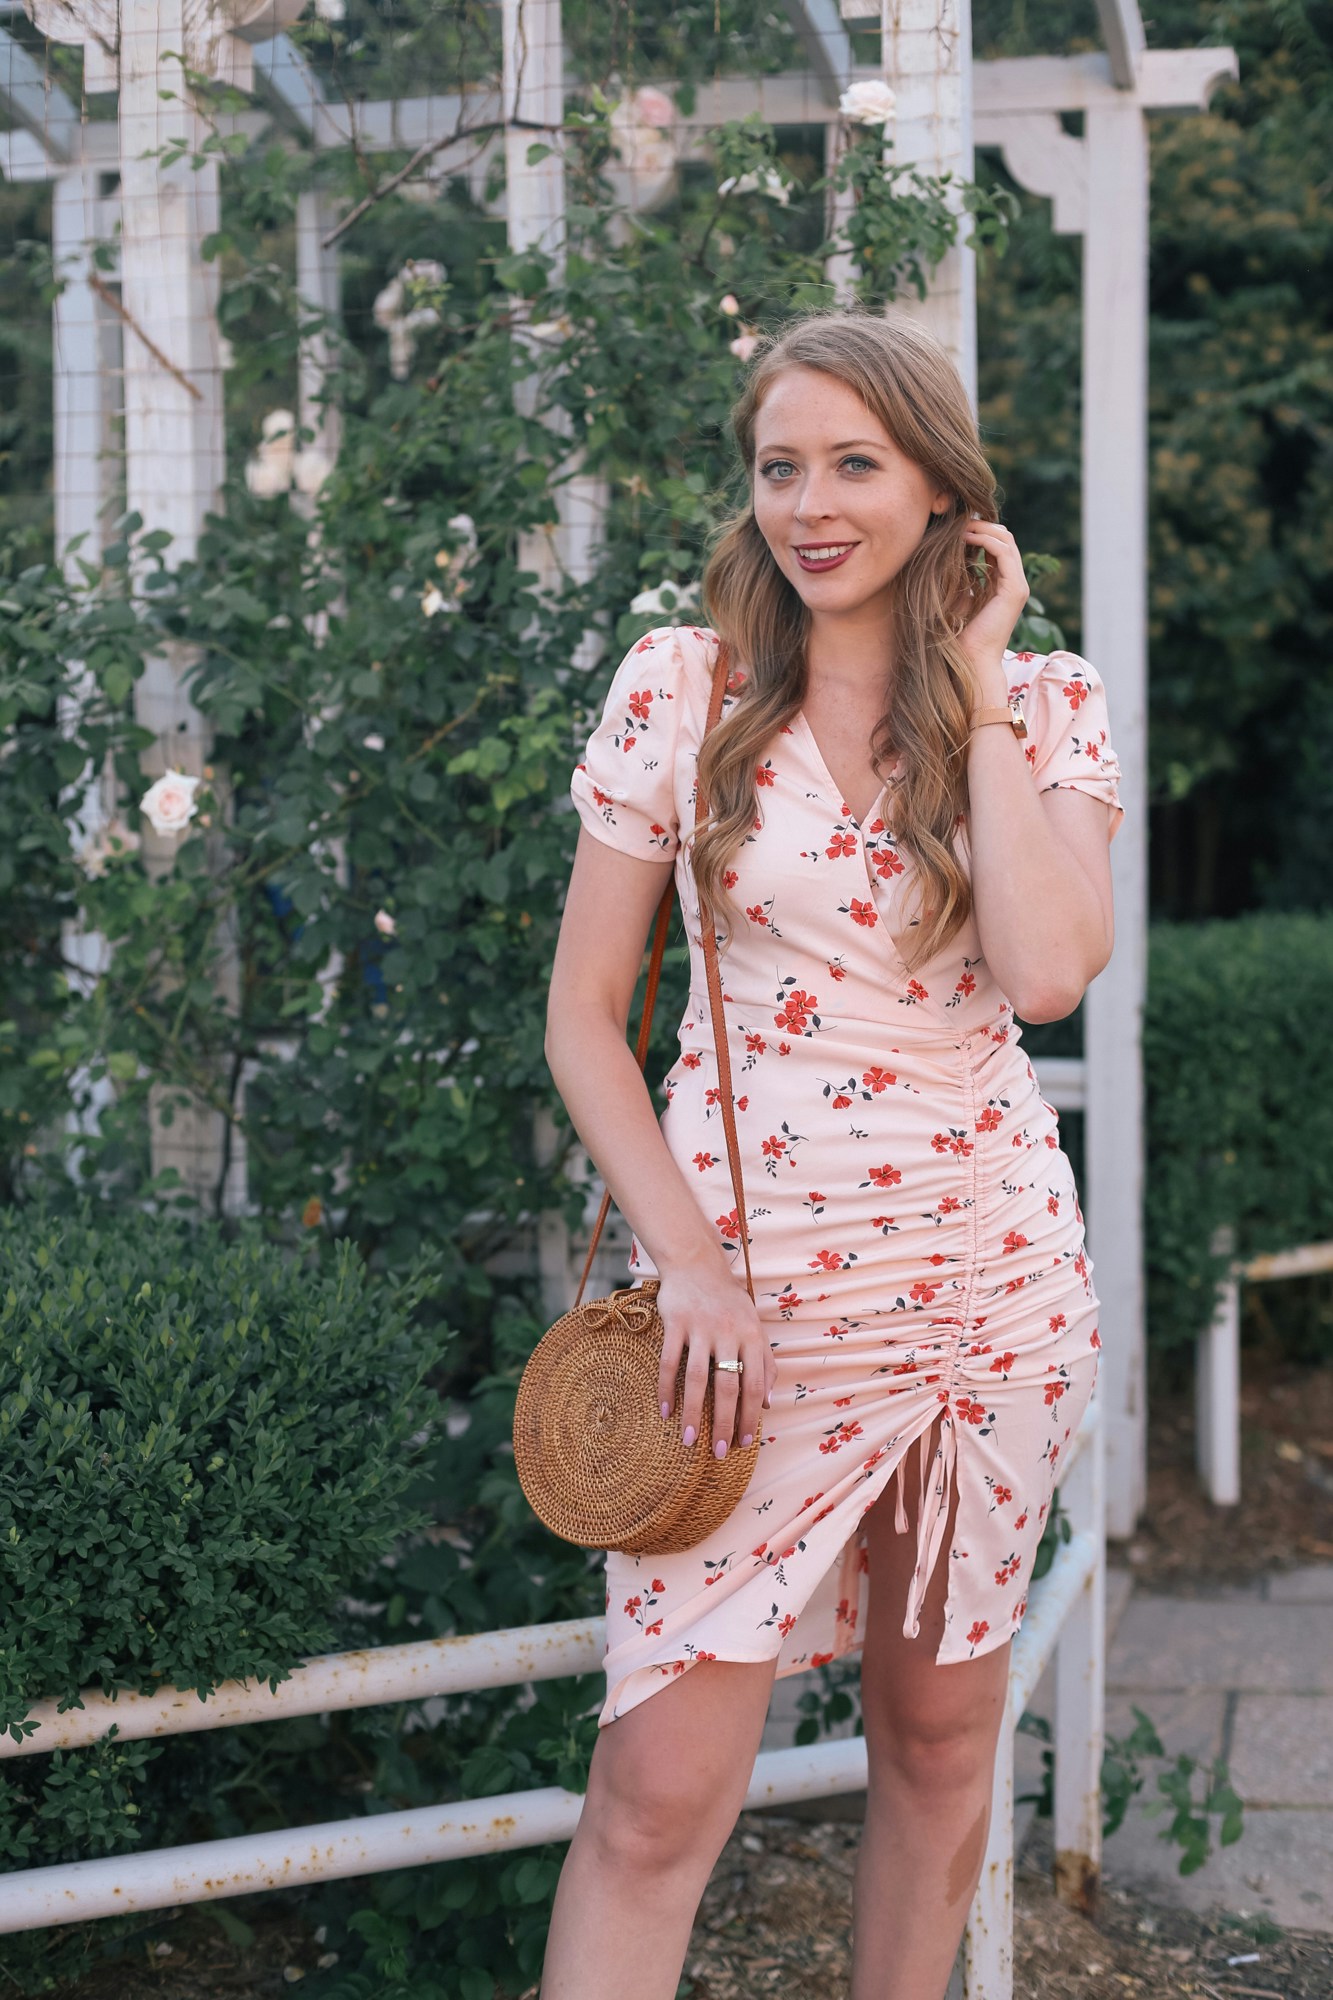 J.O.A. Cinch Front Dress - this chic rose print dress can transition from summer to fall with the right accessories.